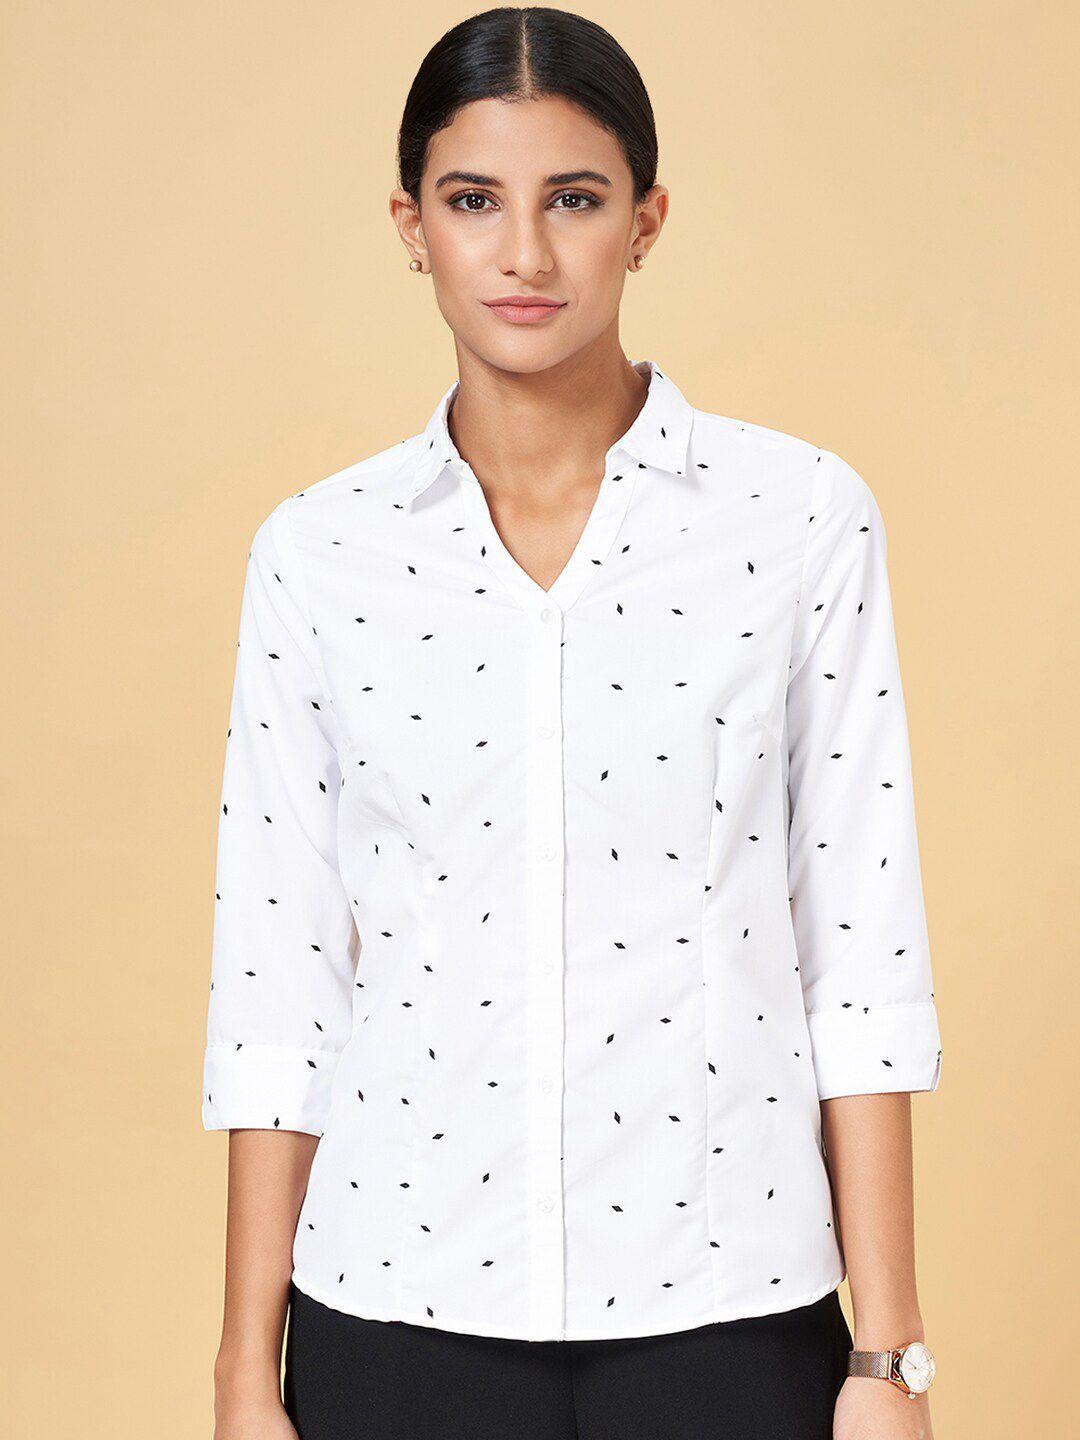 annabelle by pantaloons printed classic formal shirt